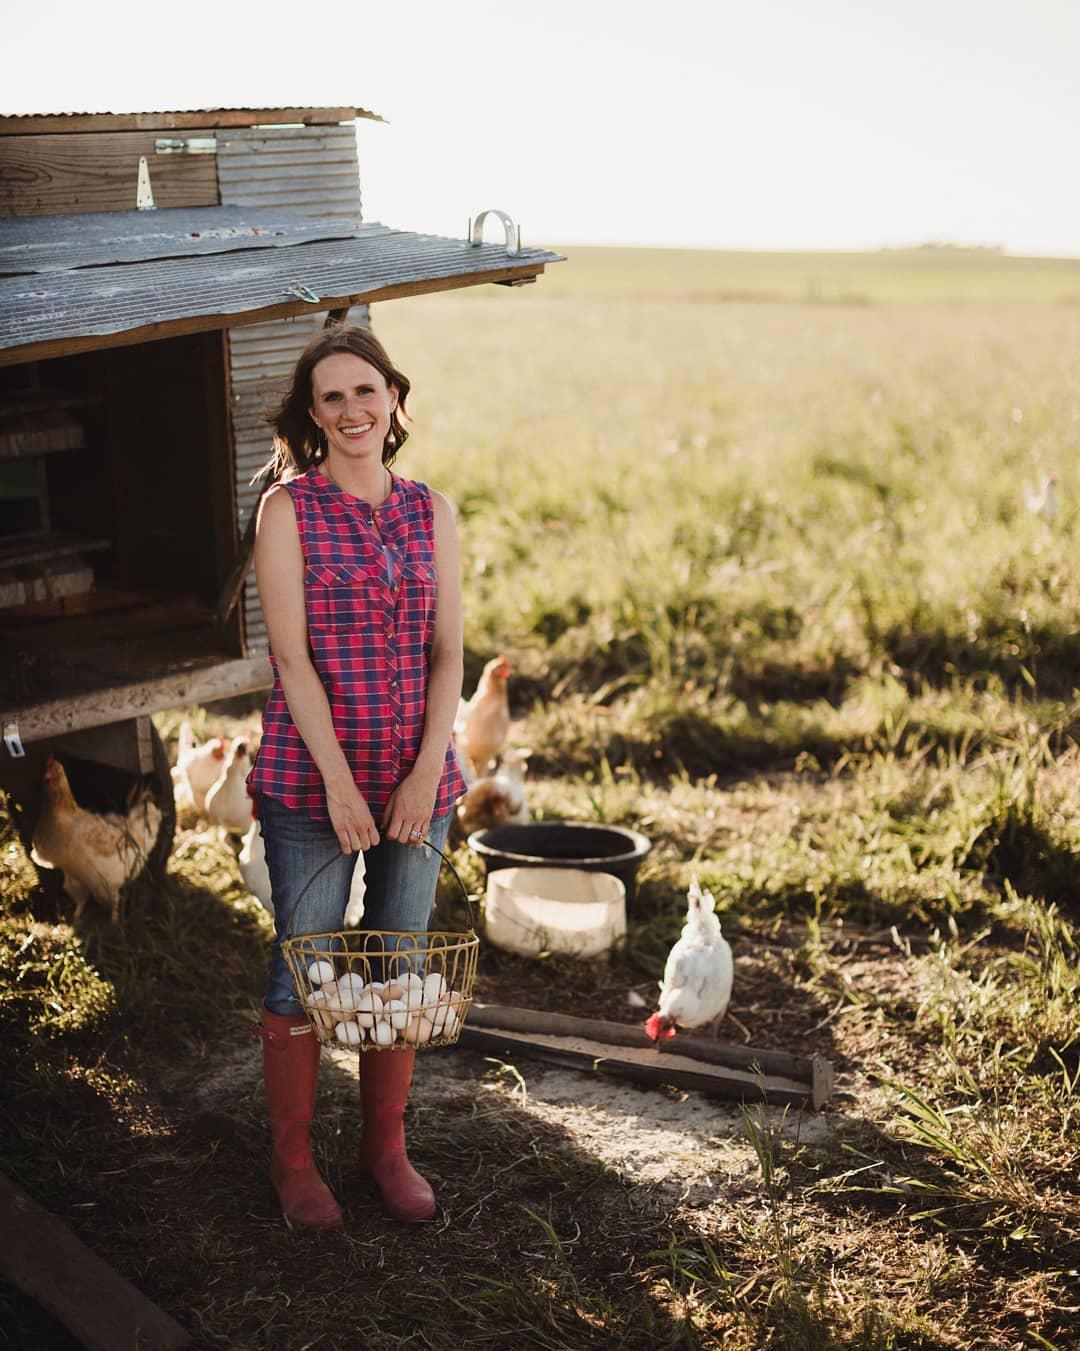 Sarah Fischer, 34, a registered nurse, left her healthcare profession in 2020 to work on her family farm full-time. (Courtesy of <a href="https://www.instagram.com/naturespantryfarm/">Nature's Pantry Farm</a>)